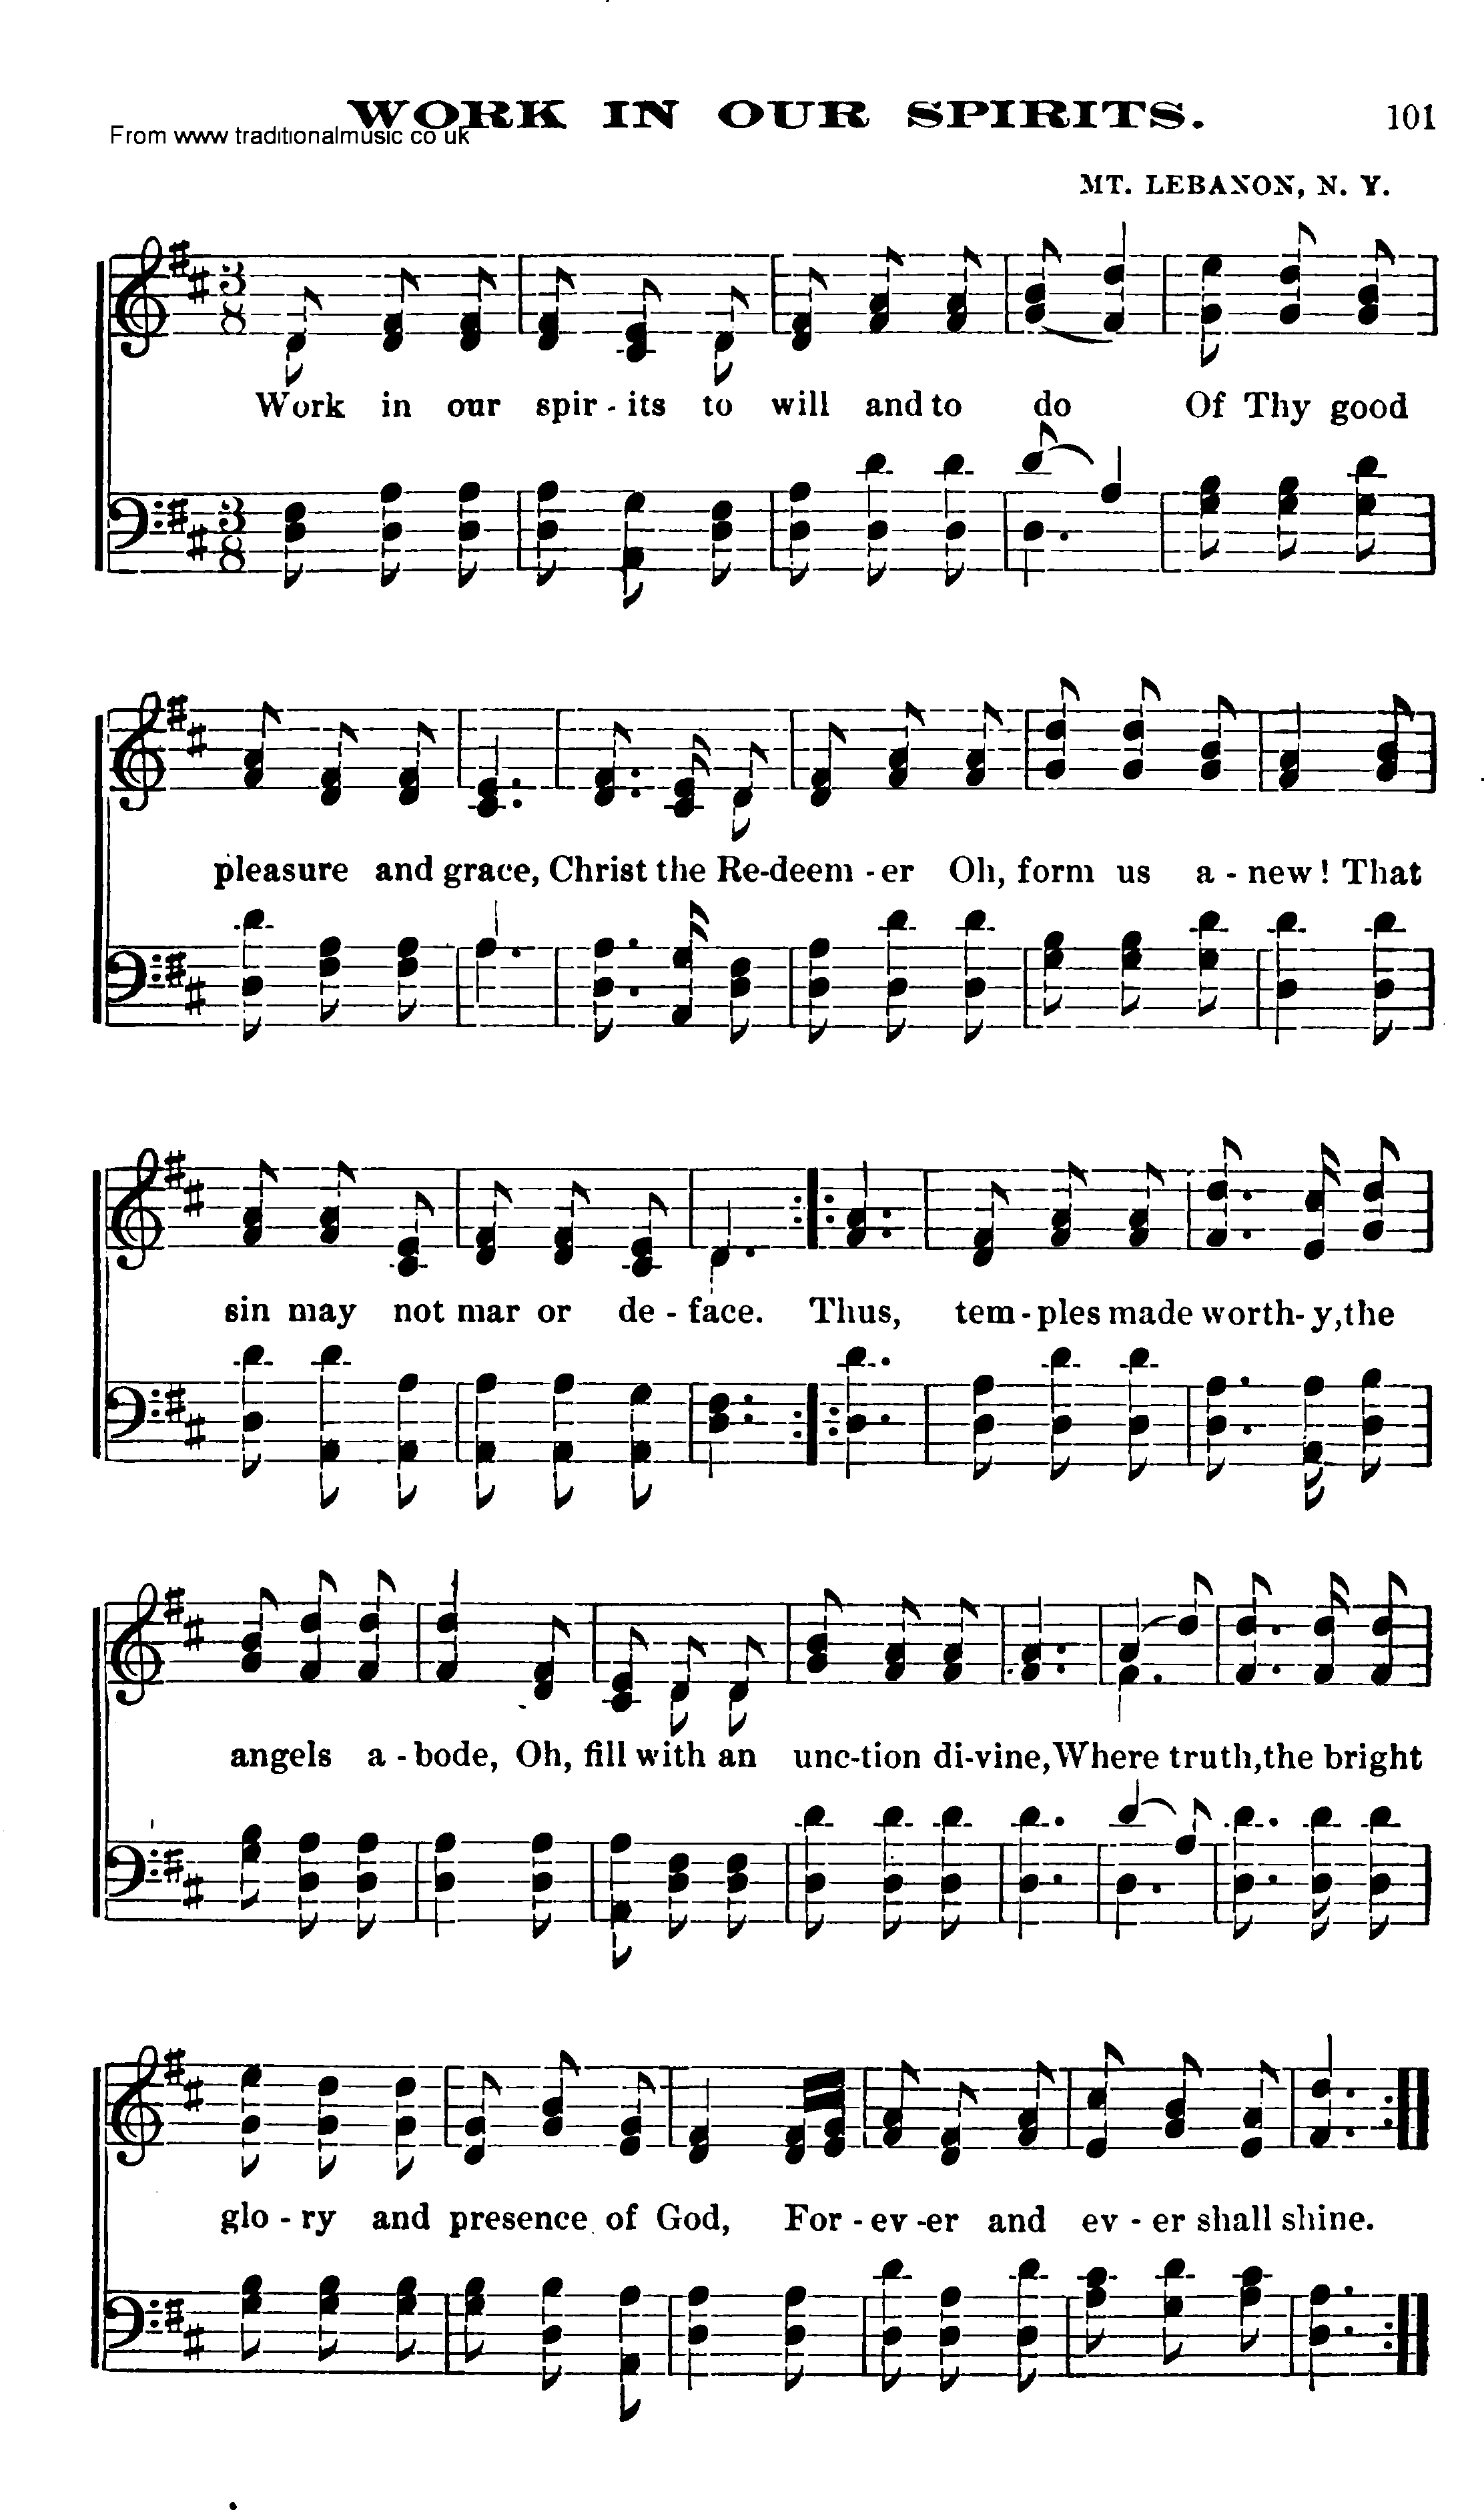 Shaker Music collection, Hymn: Work In Our Spirits, sheetmusic and PDF